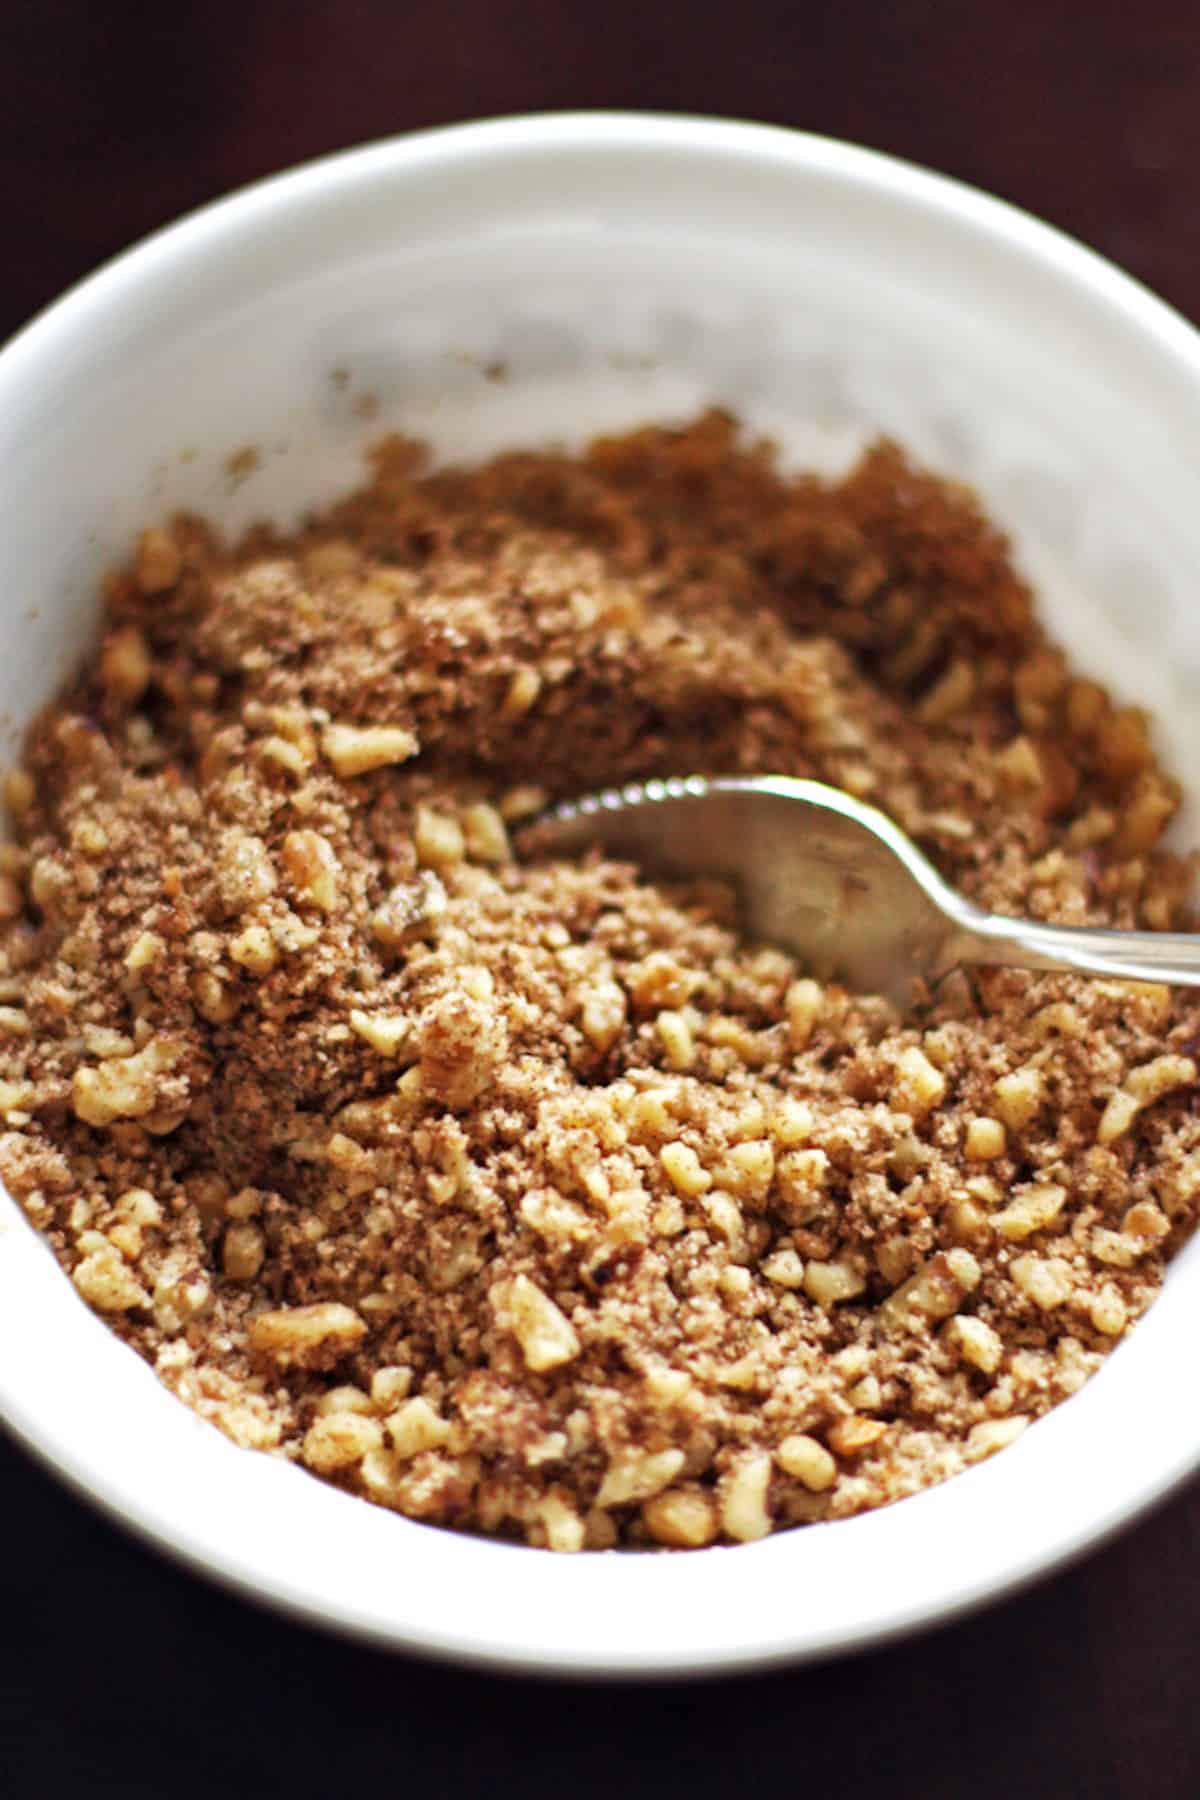 A small bowl of streusel crumble made with brown sugar, walnuts, and flour.